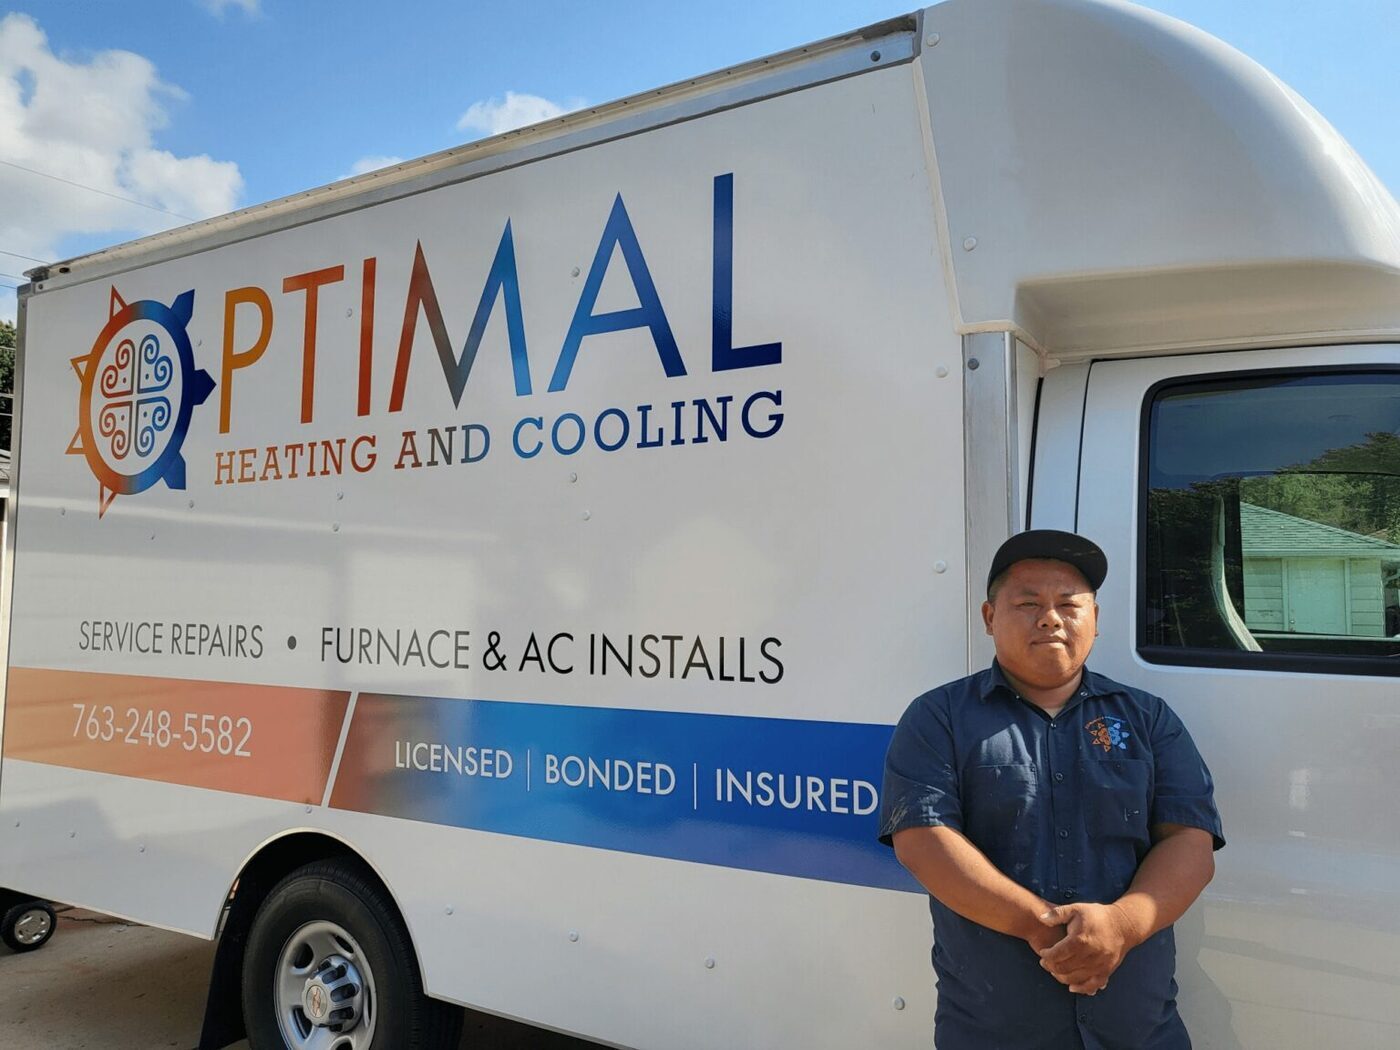 The fully licensed and insured company, located in Brooklyn Center, MN, has become the go-to name for the people of the region on the back of its superior-quality HVAC services and reliable customer support.